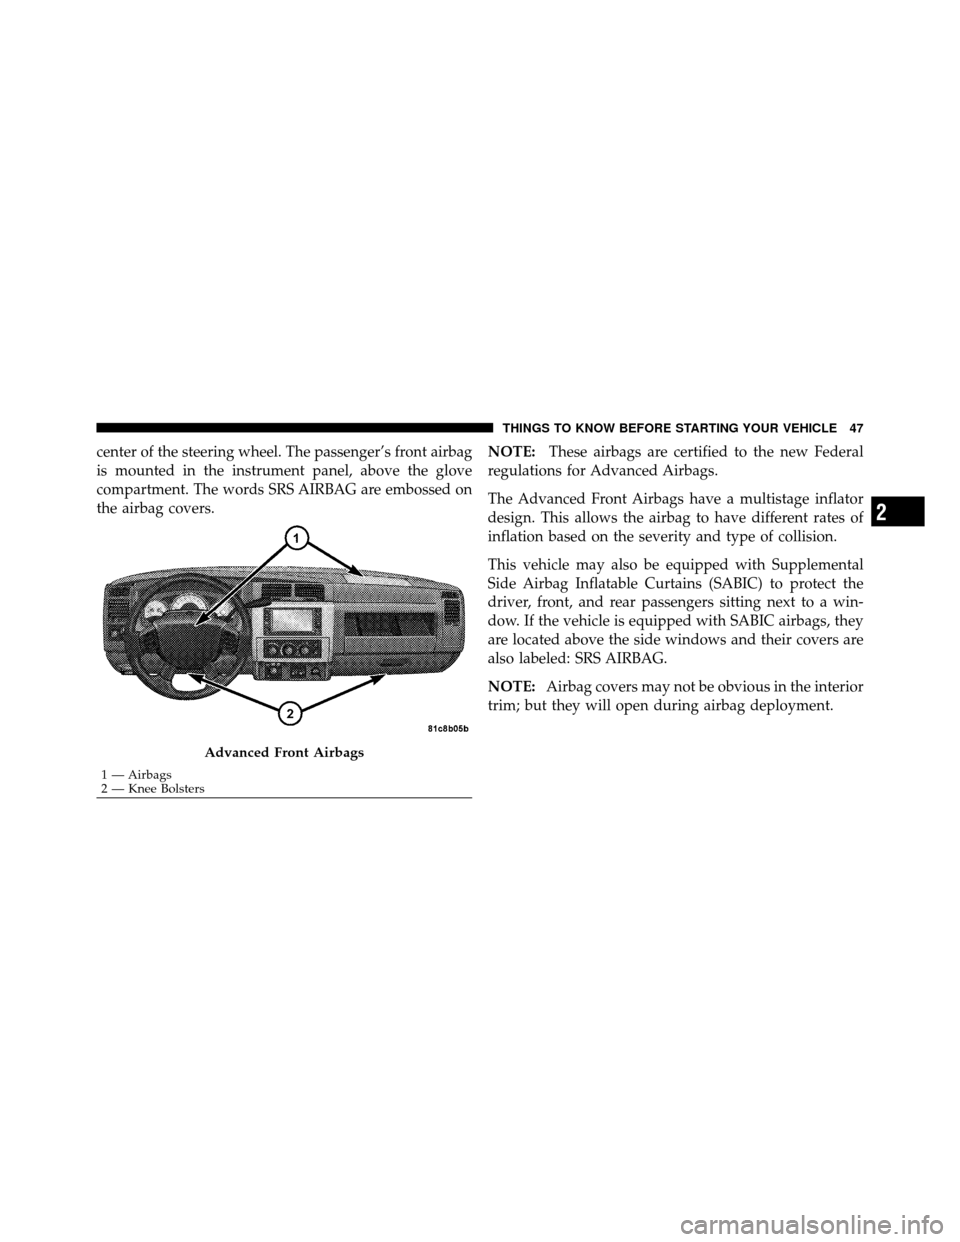 DODGE DAKOTA 2010 3.G Service Manual center of the steering wheel. The passenger’s front airbag
is mounted in the instrument panel, above the glove
compartment. The words SRS AIRBAG are embossed on
the airbag covers.NOTE:
These airbags